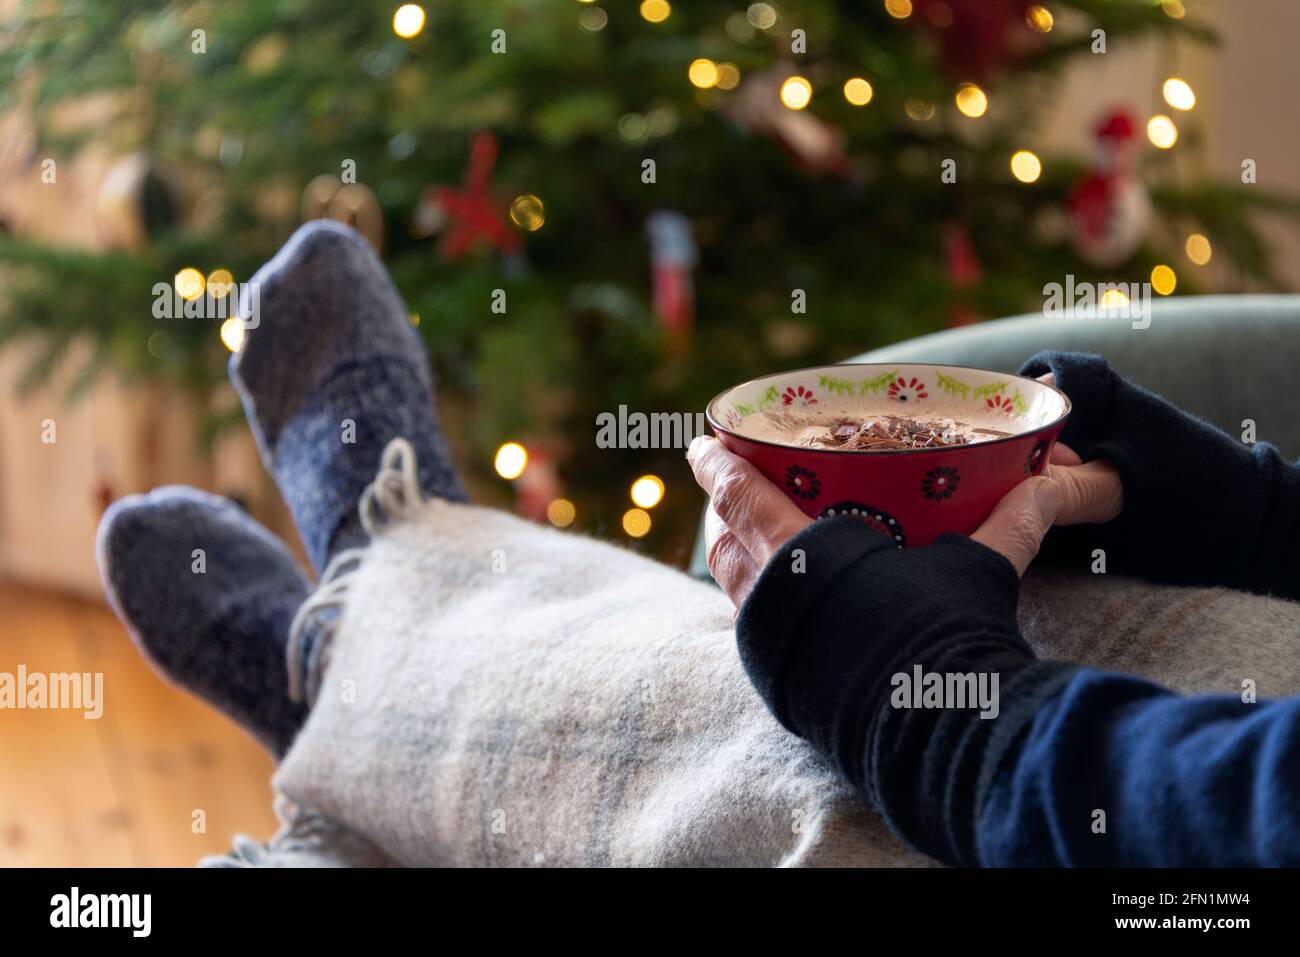 A large mug of hot chocolate being held in front of a Christmas tree - feeling cosy. Stock Photo